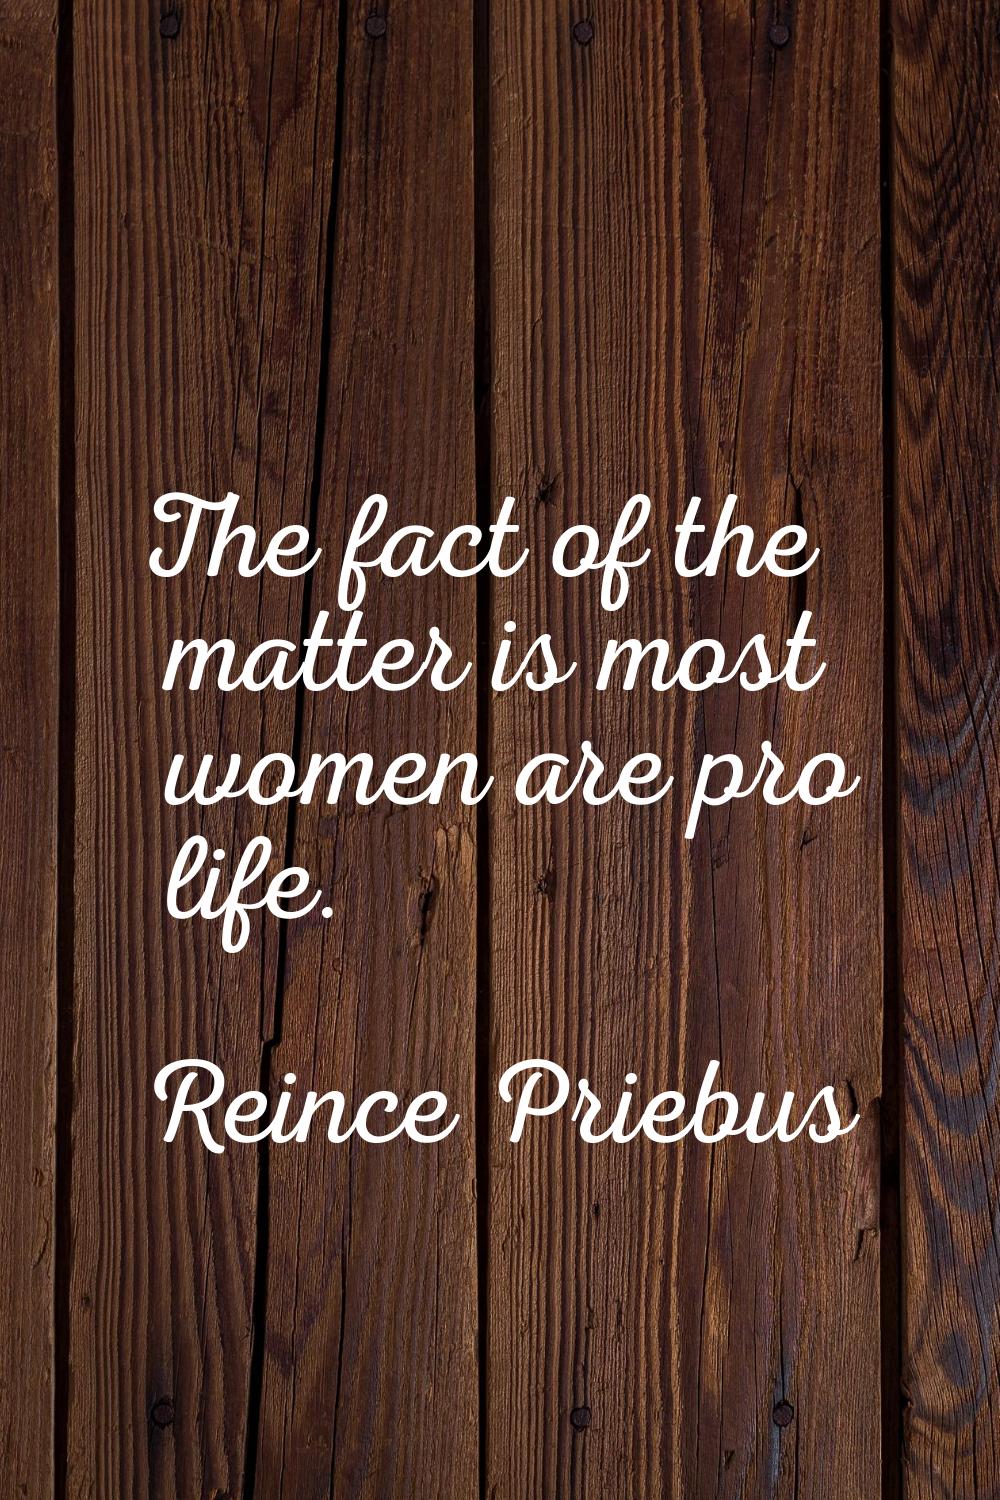 The fact of the matter is most women are pro life.